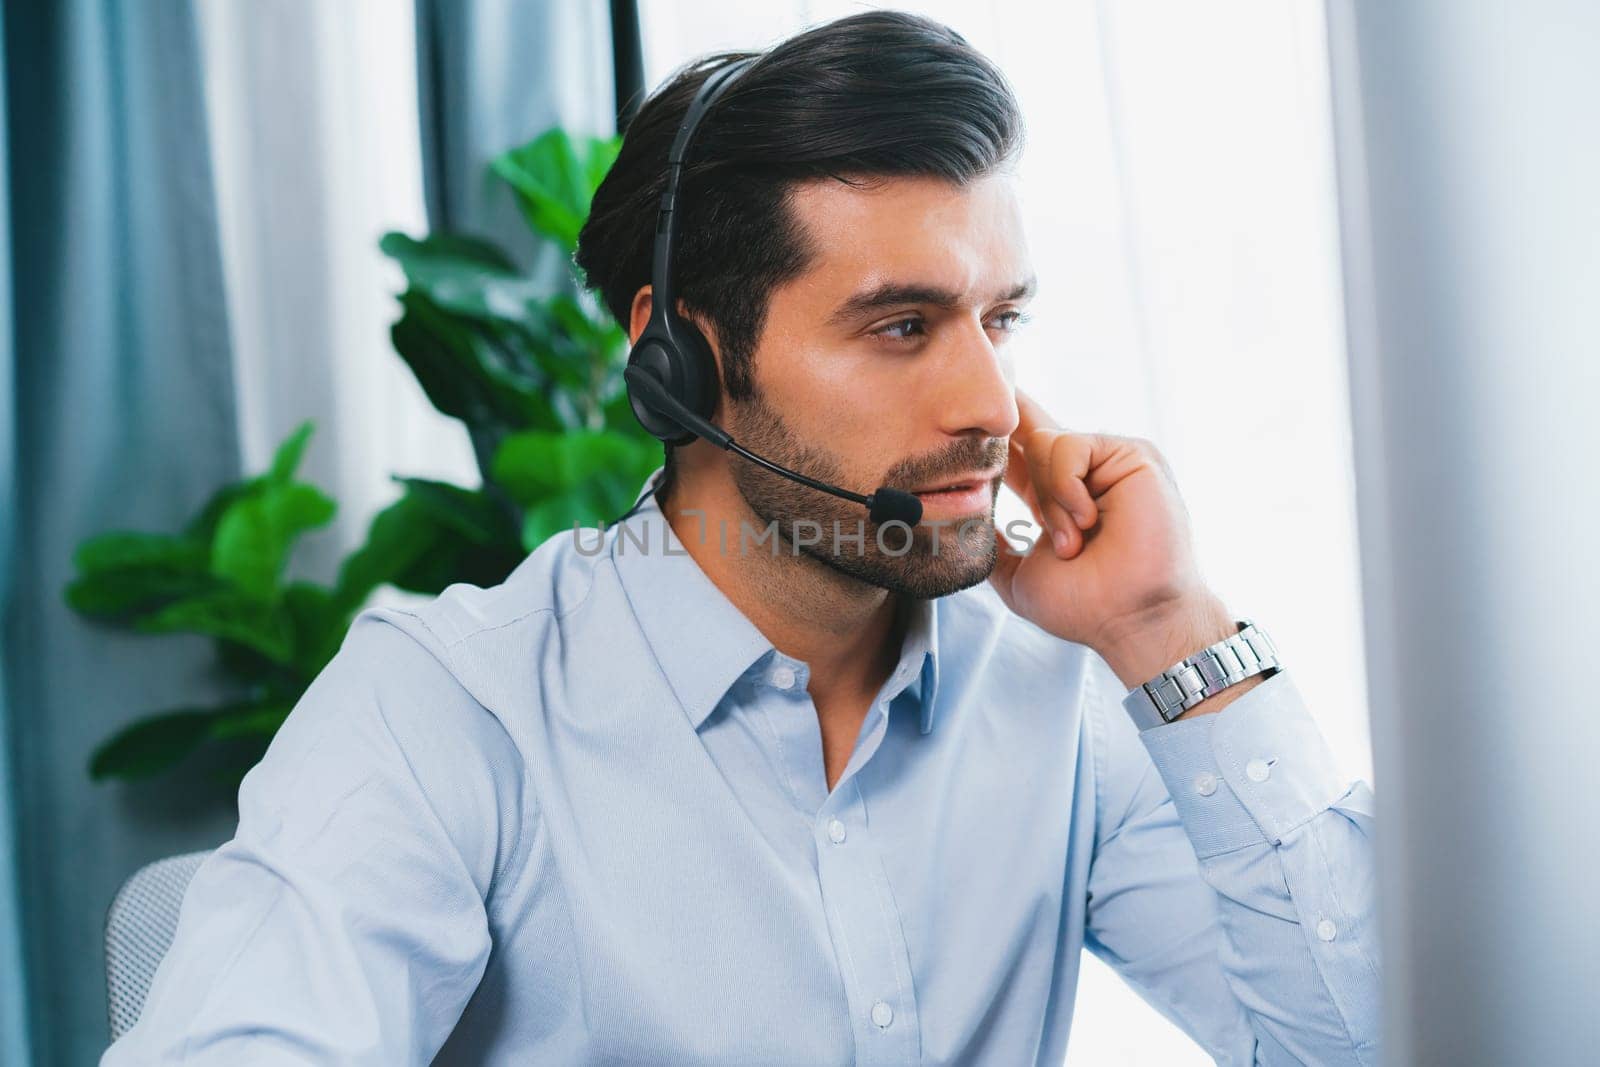 Male call center operator or telesales agent working on his desk. fervent by biancoblue